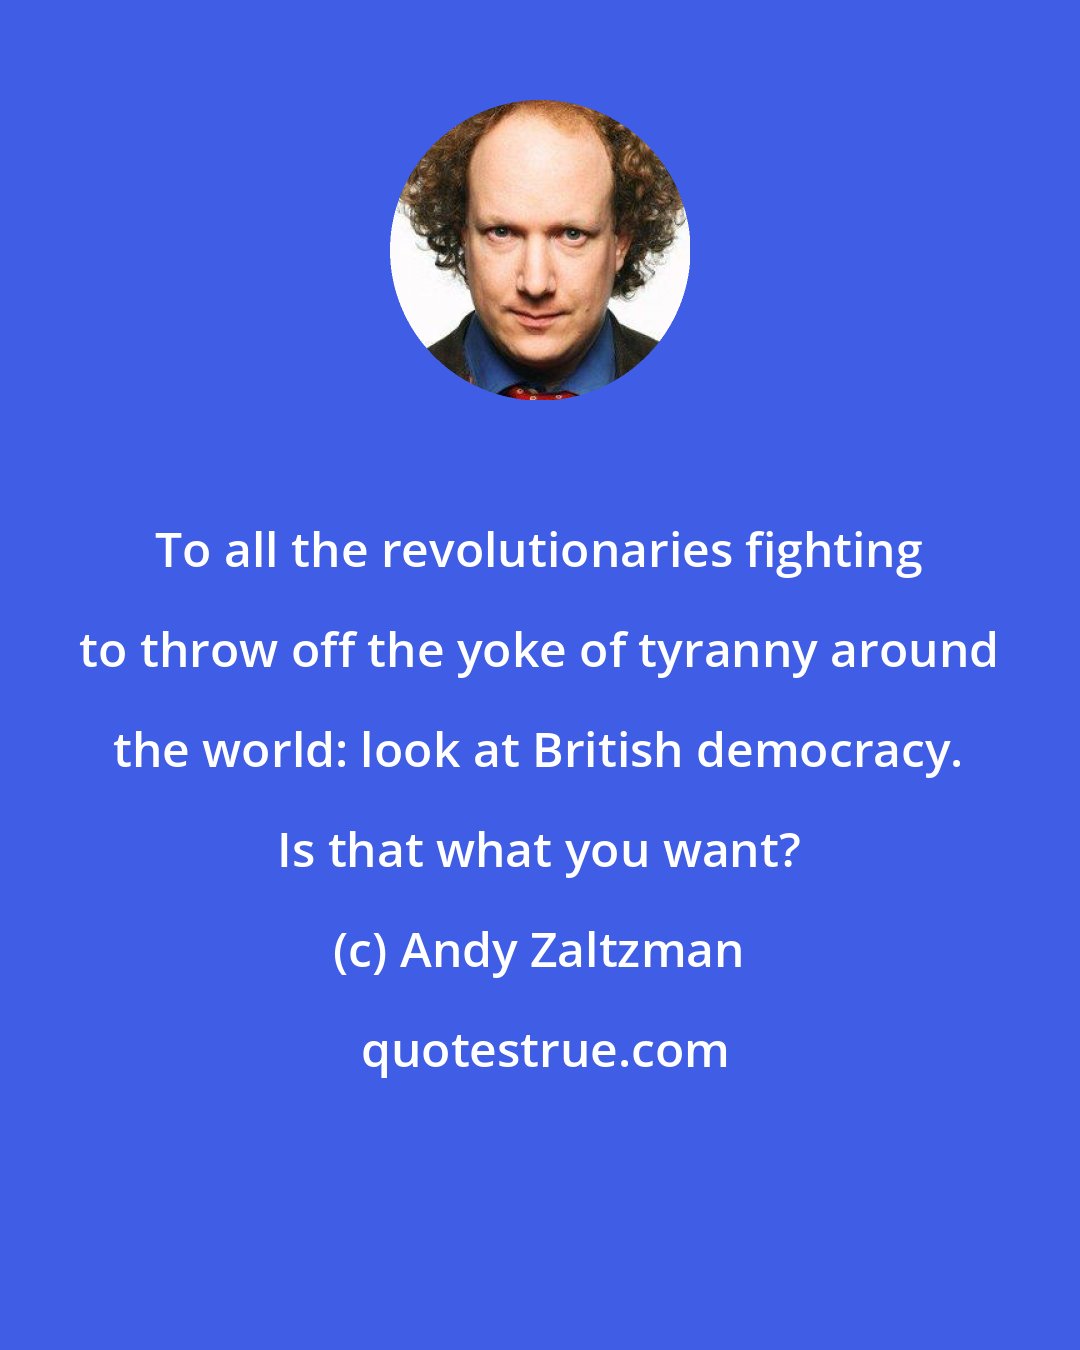 Andy Zaltzman: To all the revolutionaries fighting to throw off the yoke of tyranny around the world: look at British democracy. Is that what you want?